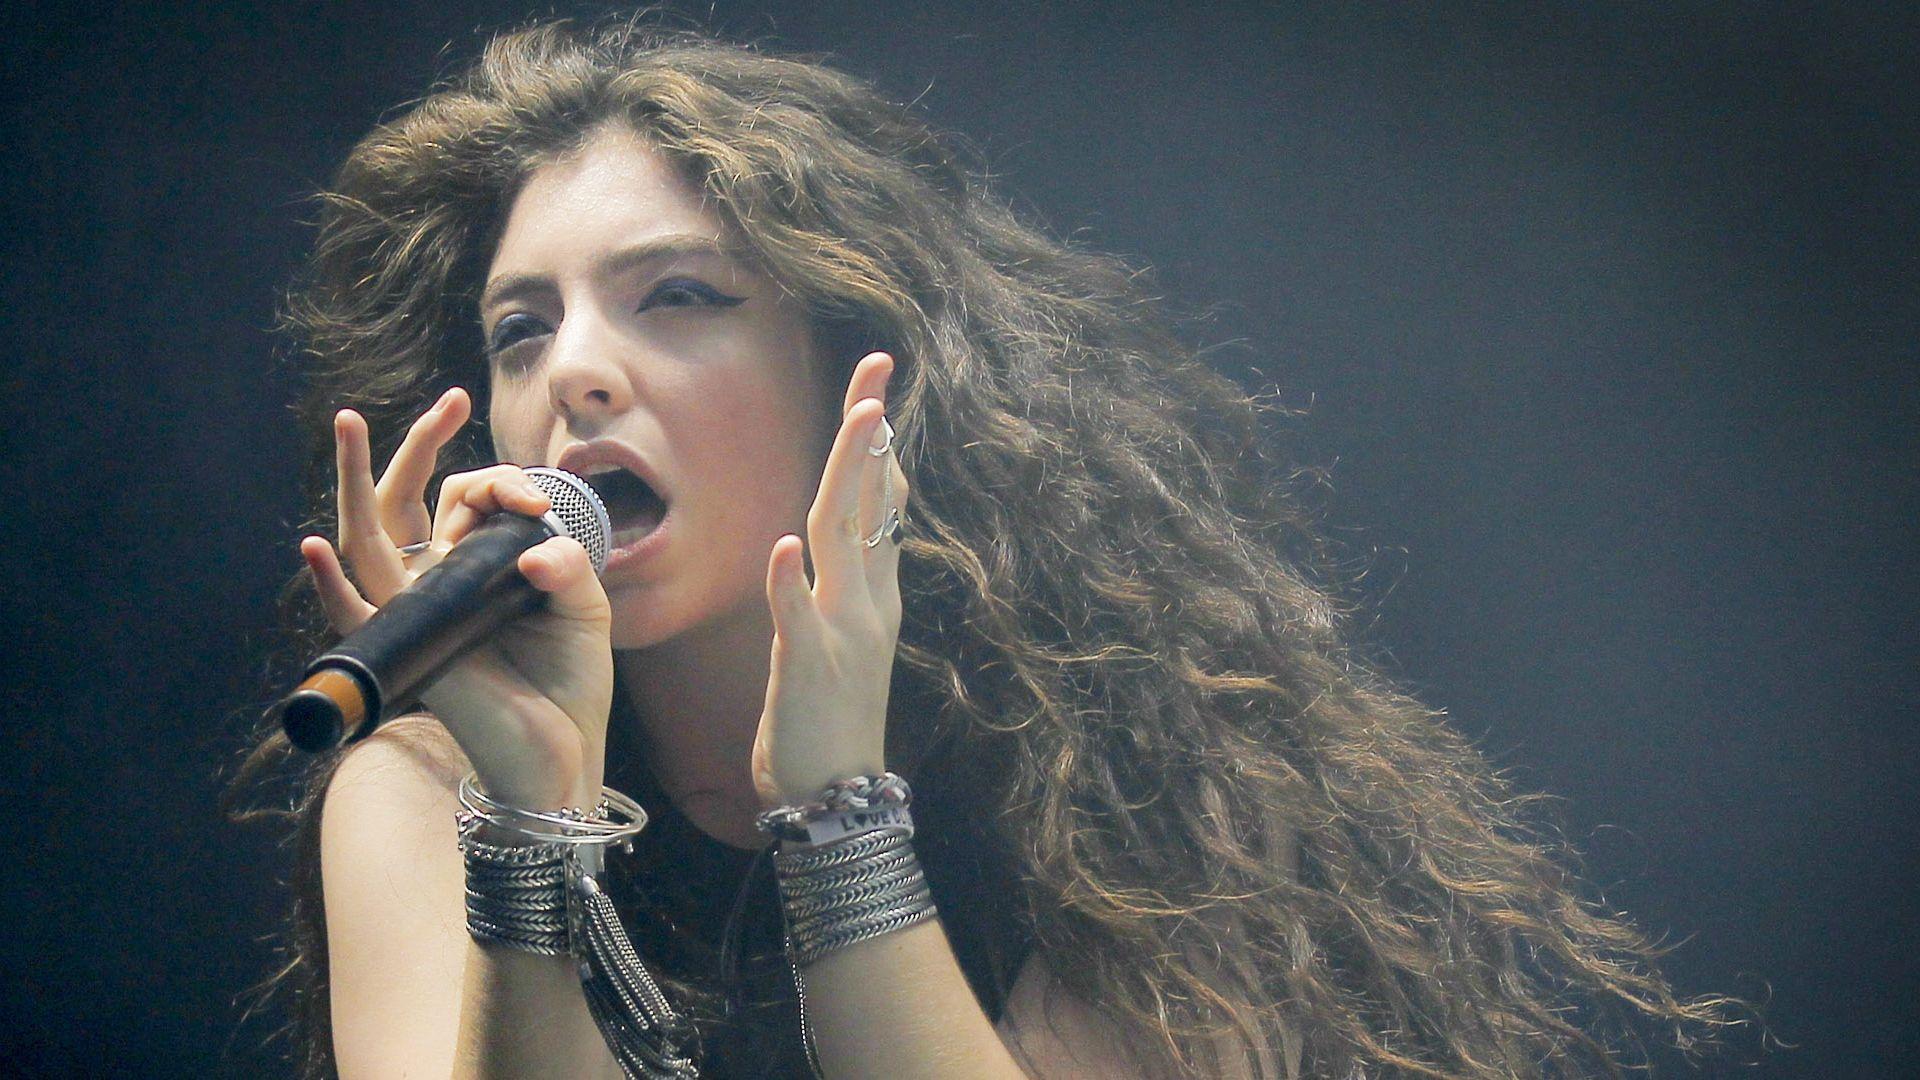 Lorde Wallpaper, Lorde Background for PC Cover Cool Photo